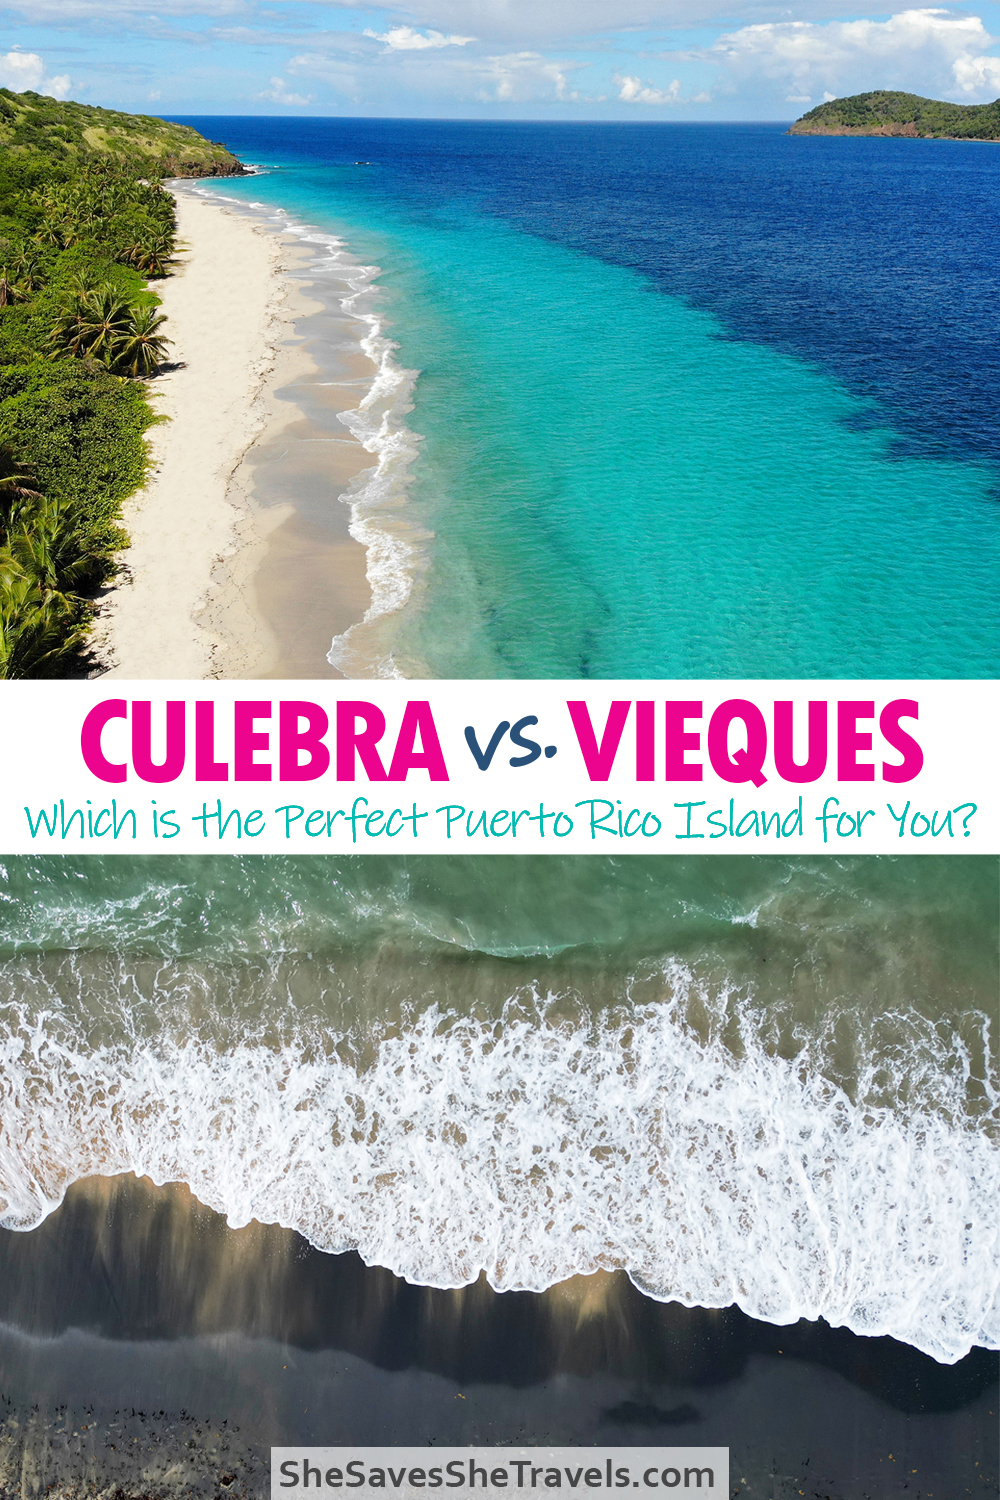 culebra vs vieques which is the perfect Puerto Rico island for you